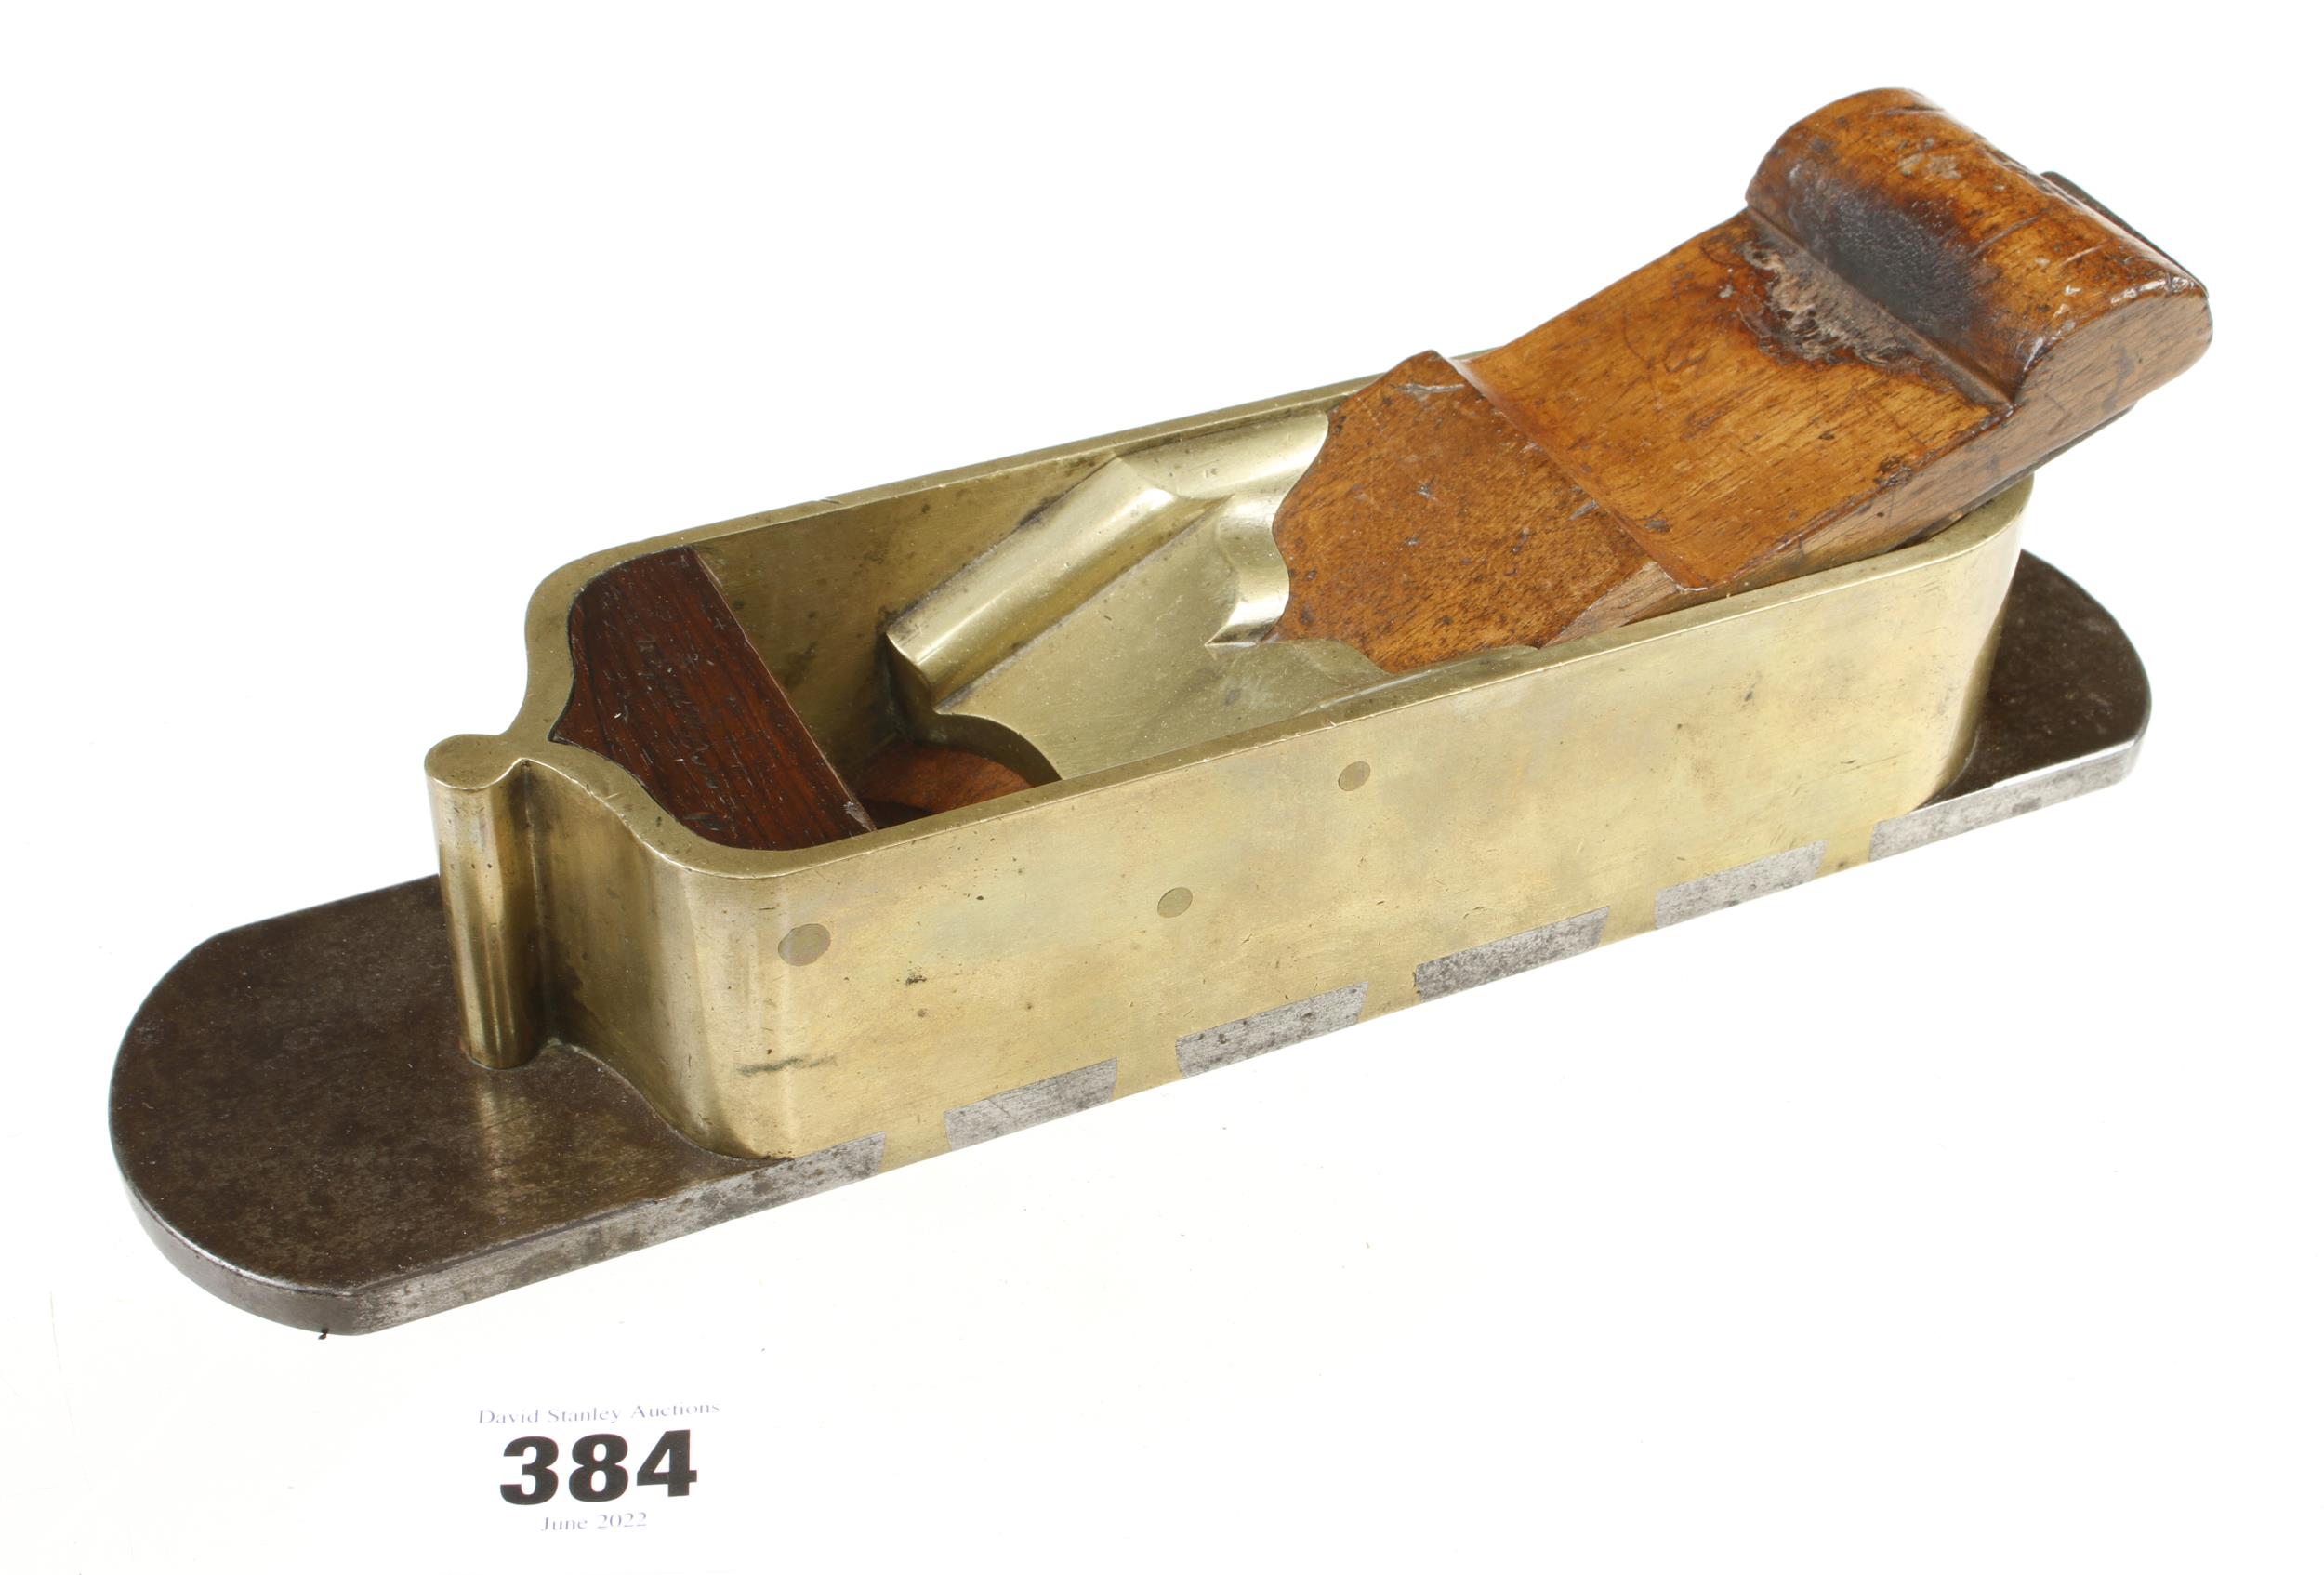 A rare, fine quality brass mitre plane 12" x 2 3/4" d/t steel sole and rosewood infill and wedge,